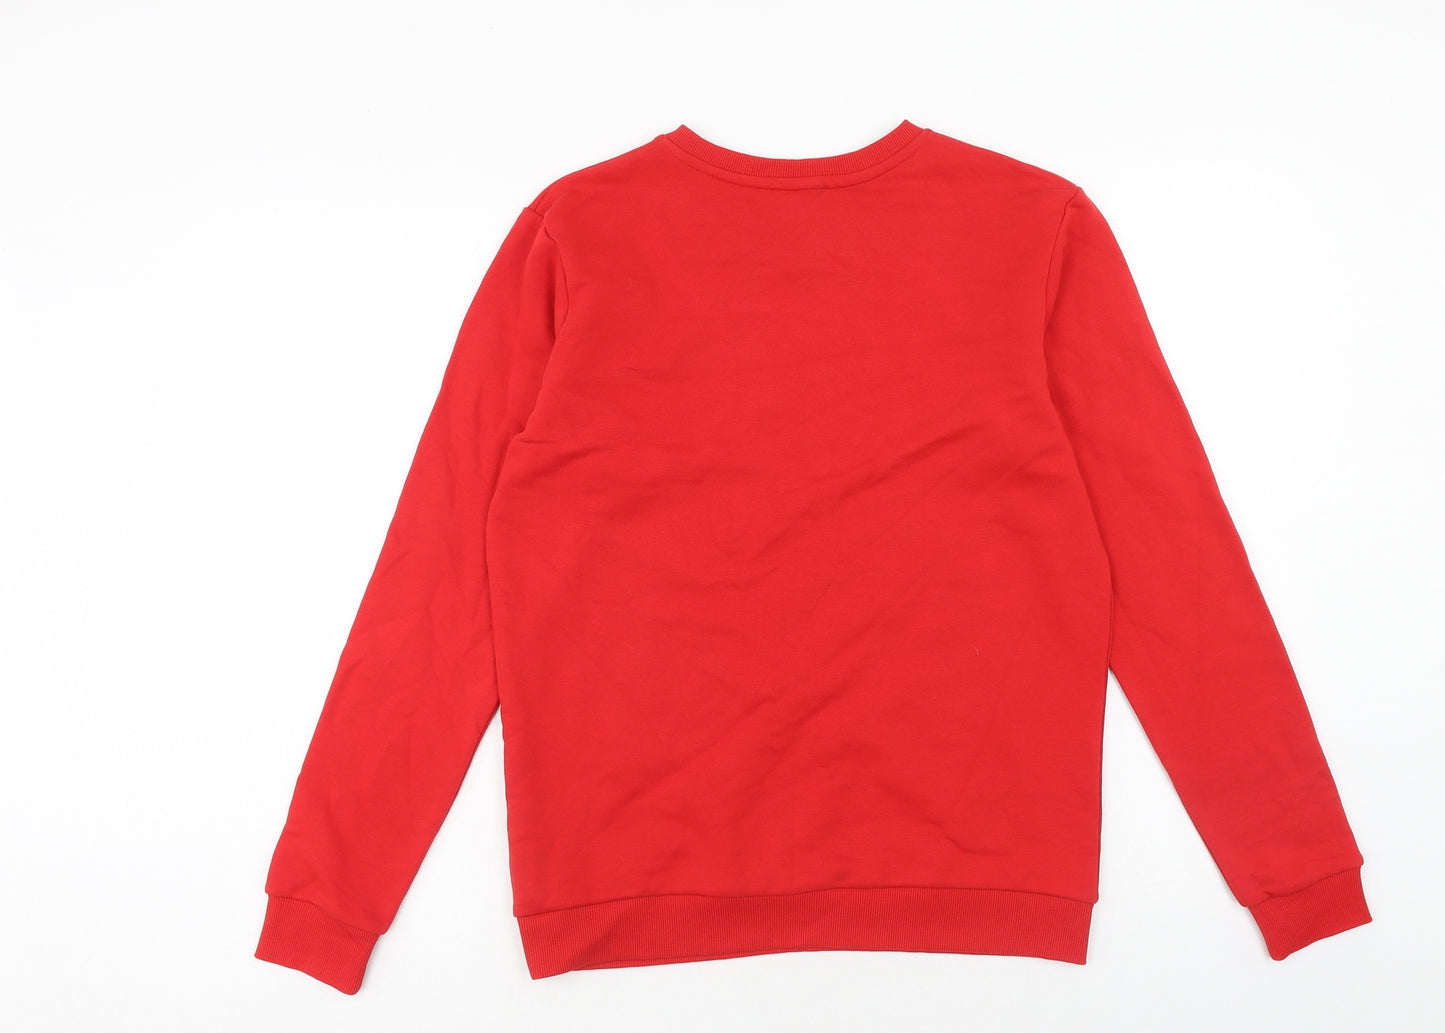 Marks and Spencer Boys Red Cotton Pullover Sweatshirt Size 14-15 Years Pullover